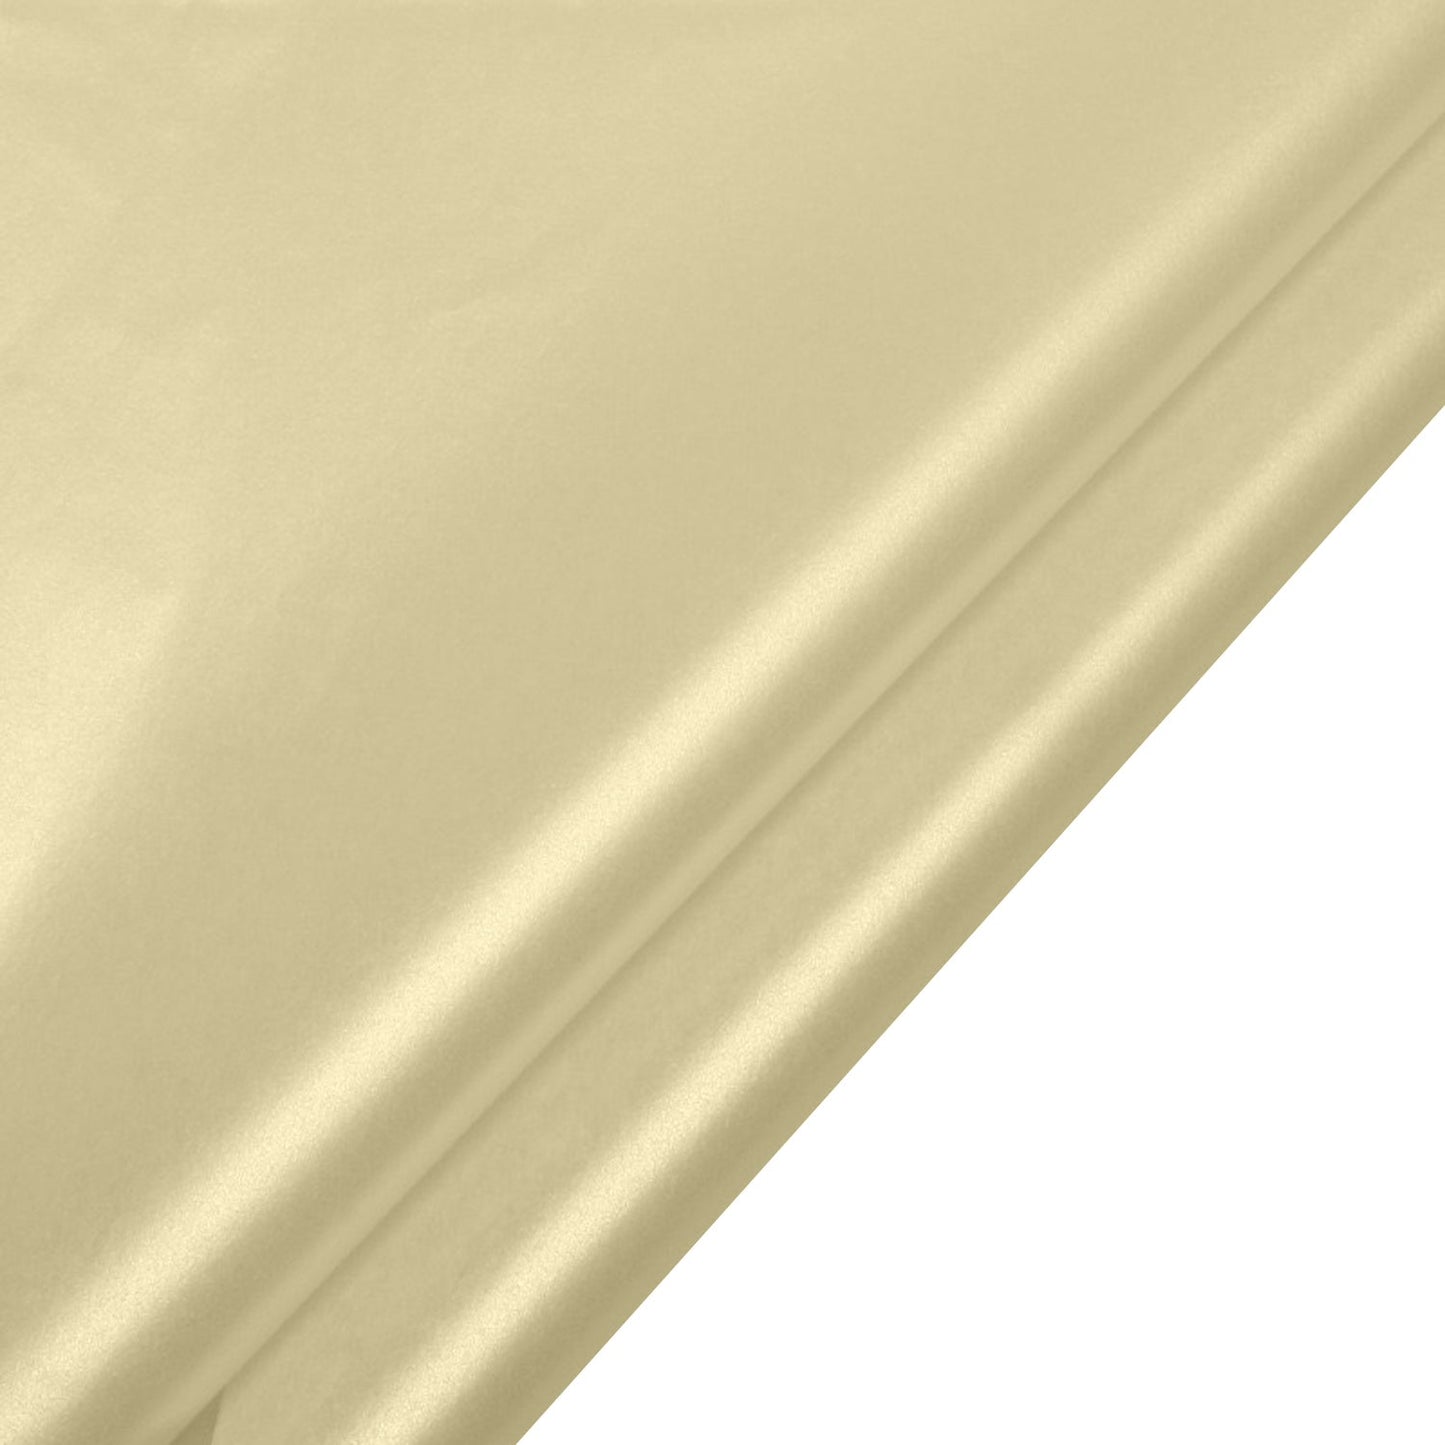 100sheets Light Yellow 19.7x27.6 inches Pearlized Tissue Paper; $0.40/pc